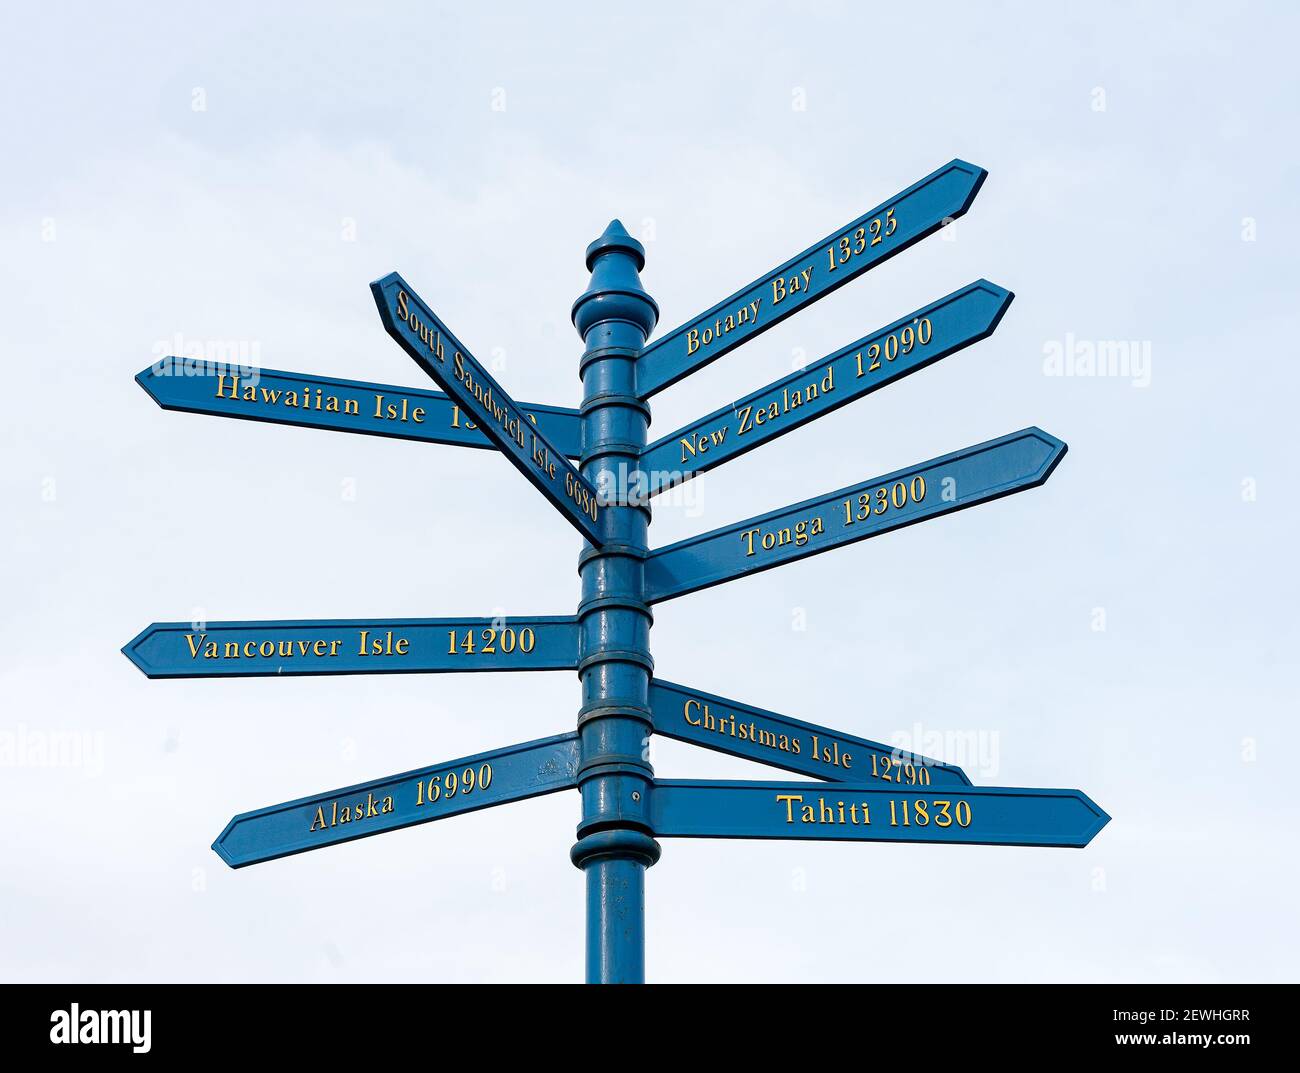 WHITBY, NORTH YORKSHIRE, UK - MARCH 17, 2010:  Signpost in the town showing direction and distance of places discovered by Captain James Cook Stock Photo